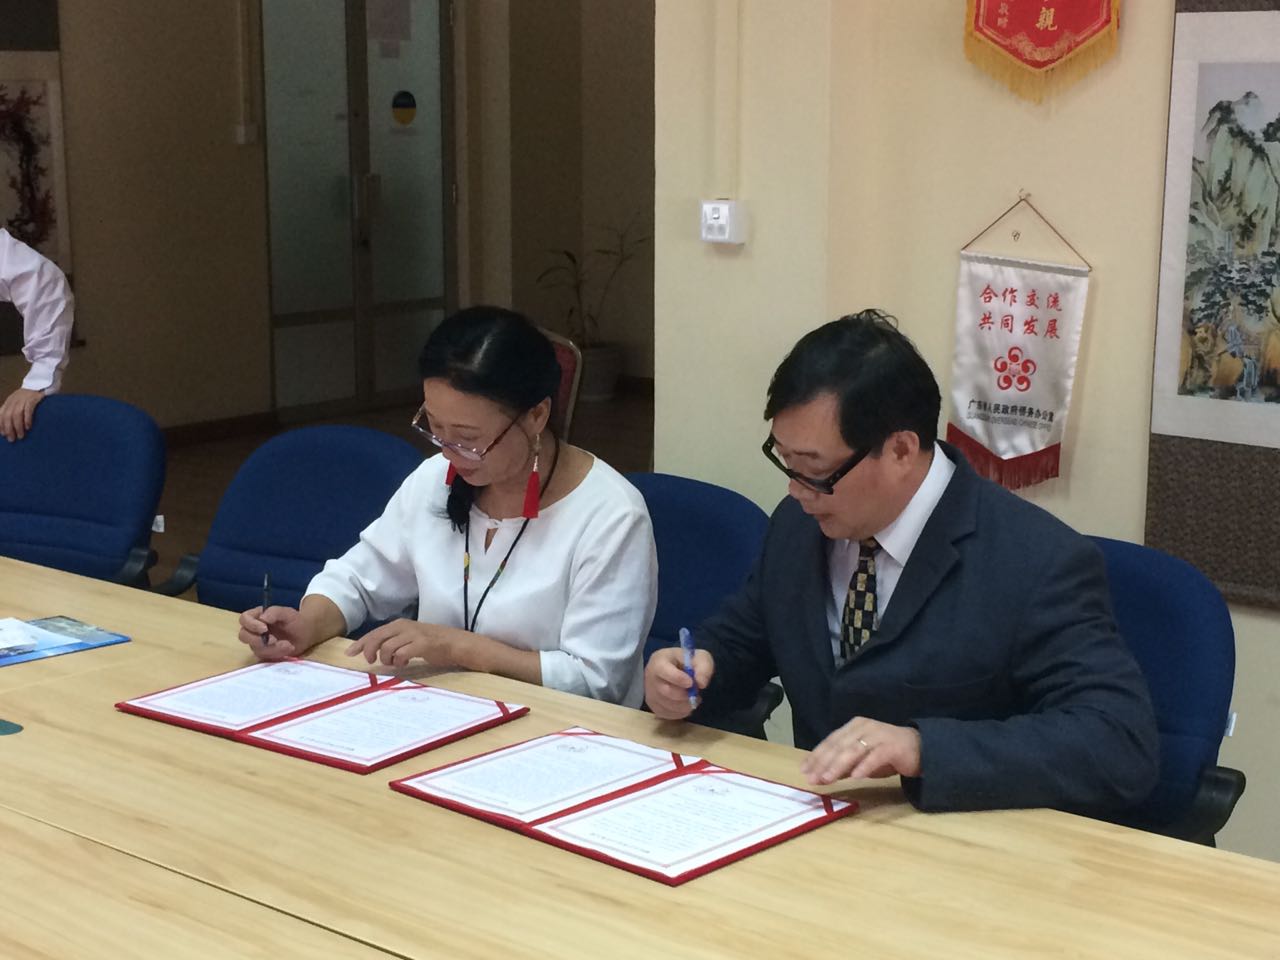 Memorandum of Cooperation signed with the Shenzhen Small Commodity Association